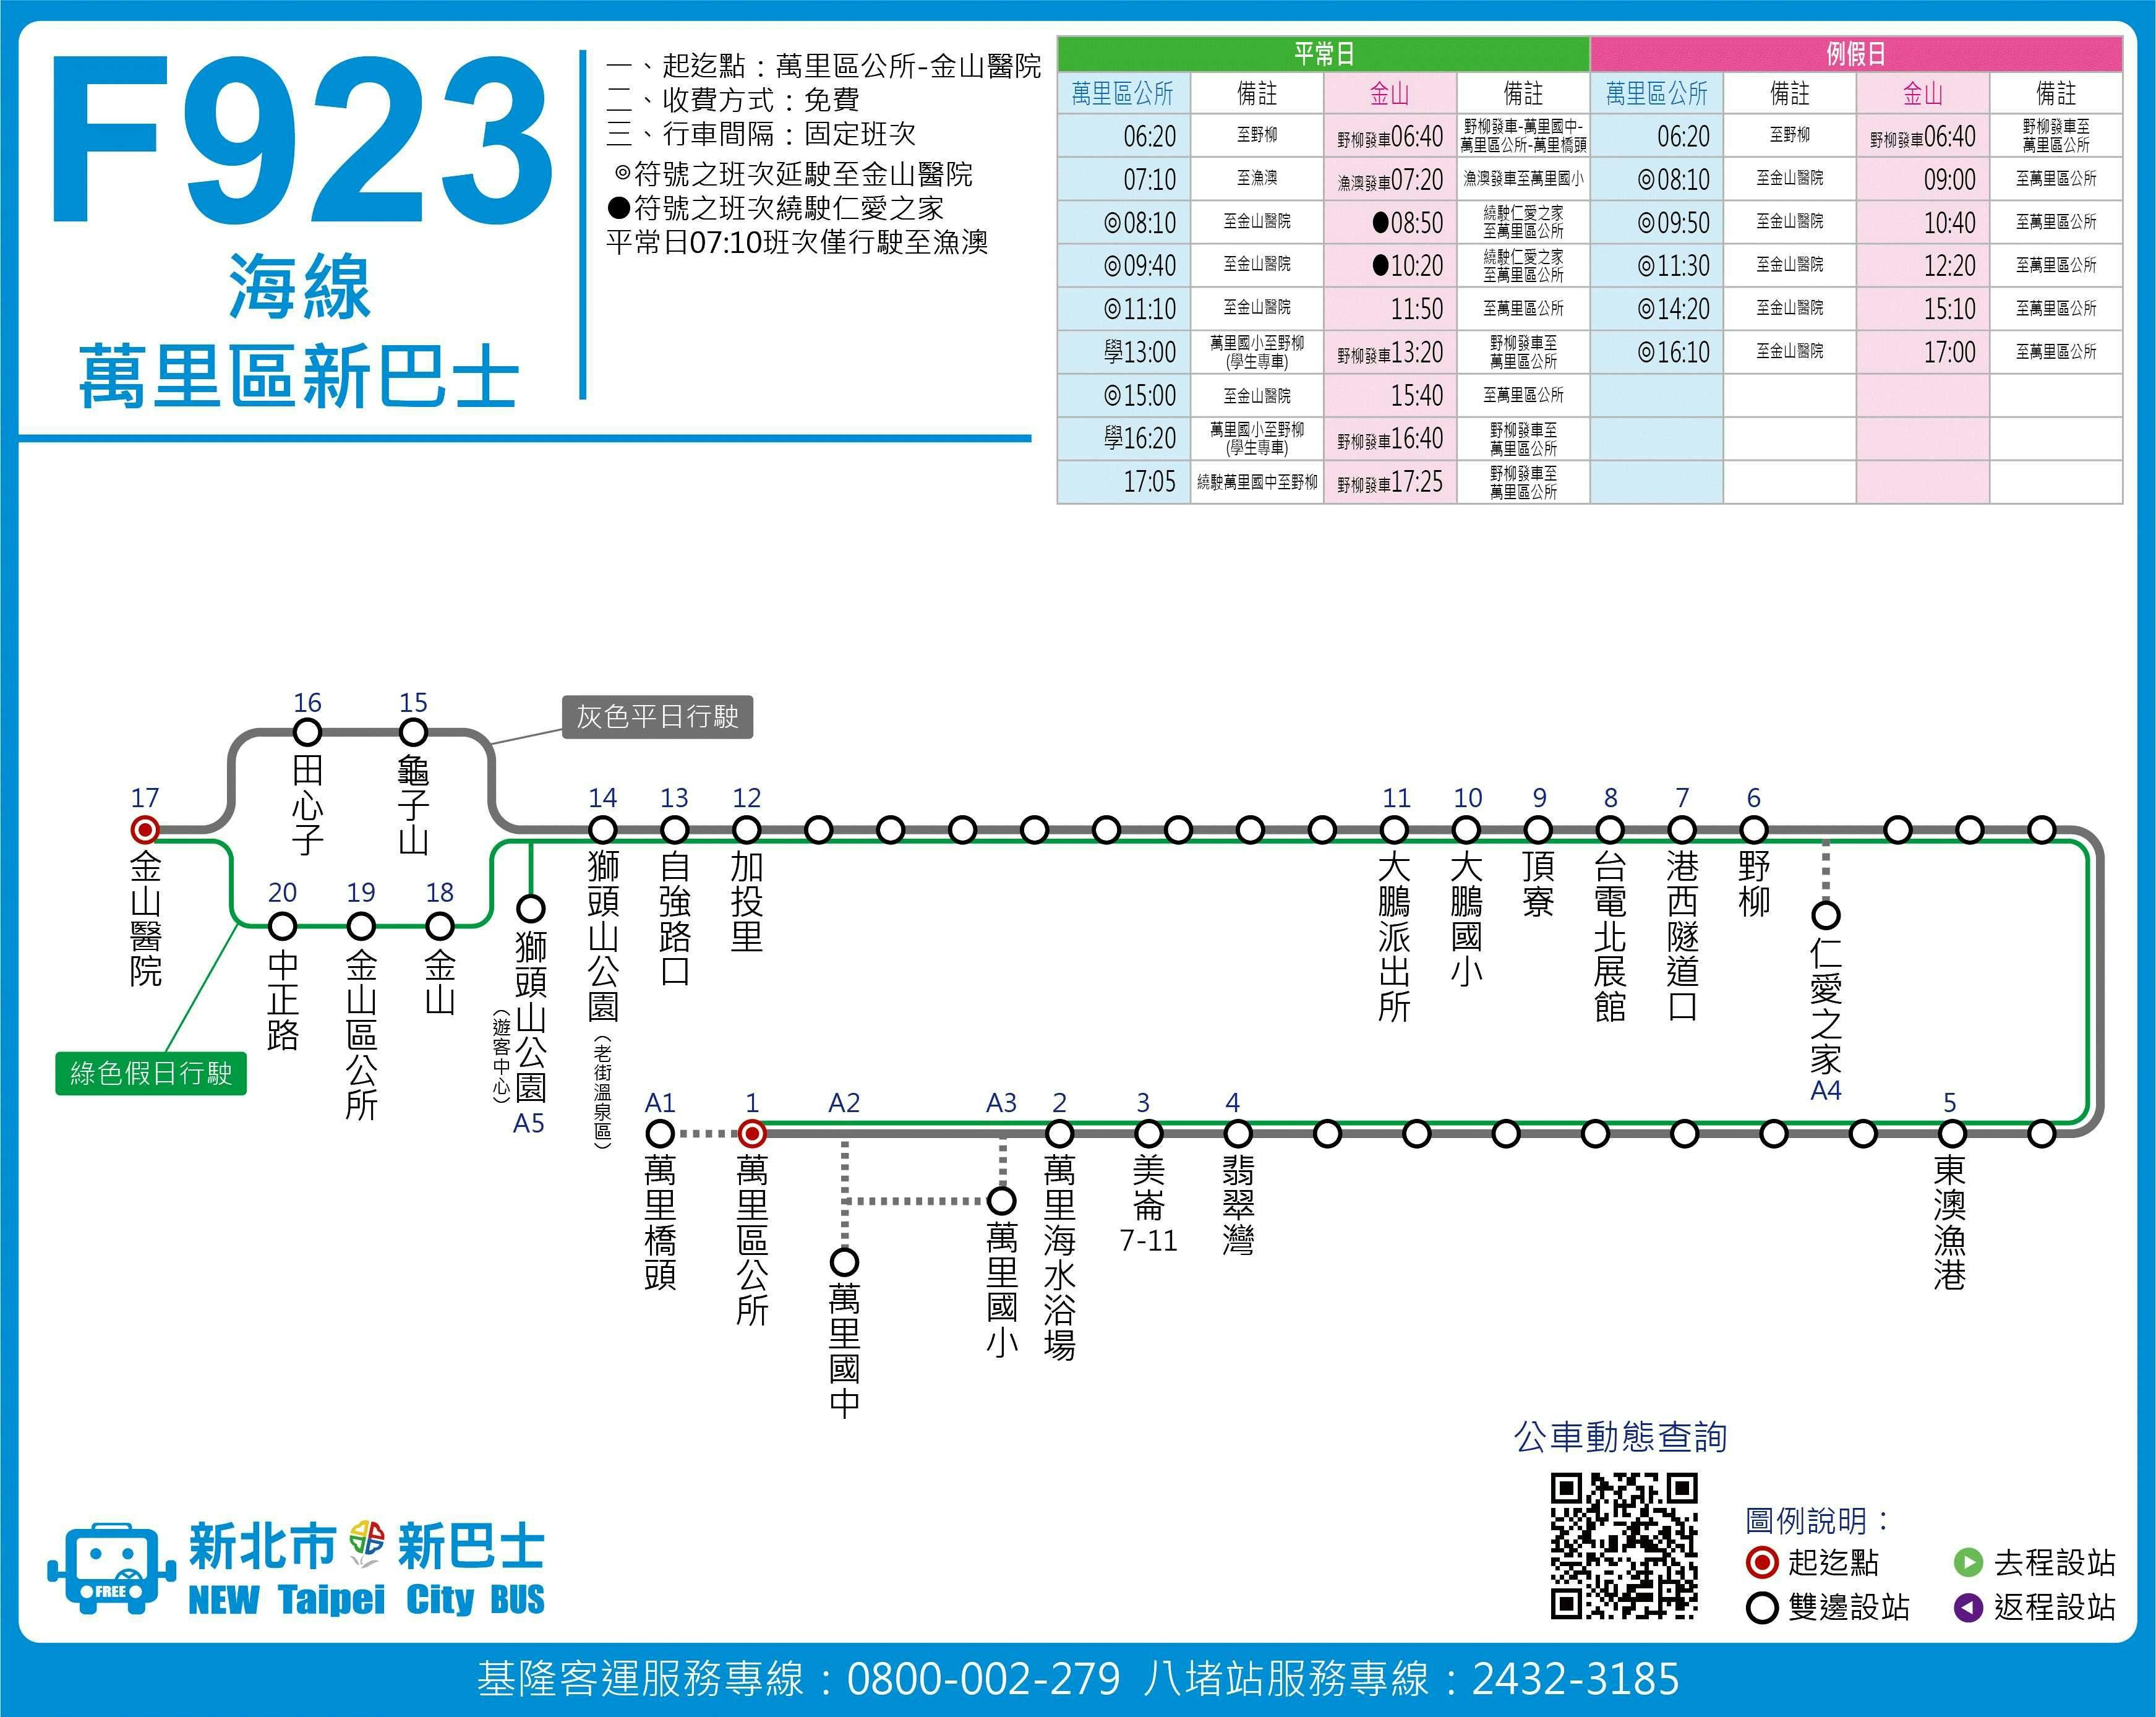 F923Route Map-新北市 Bus